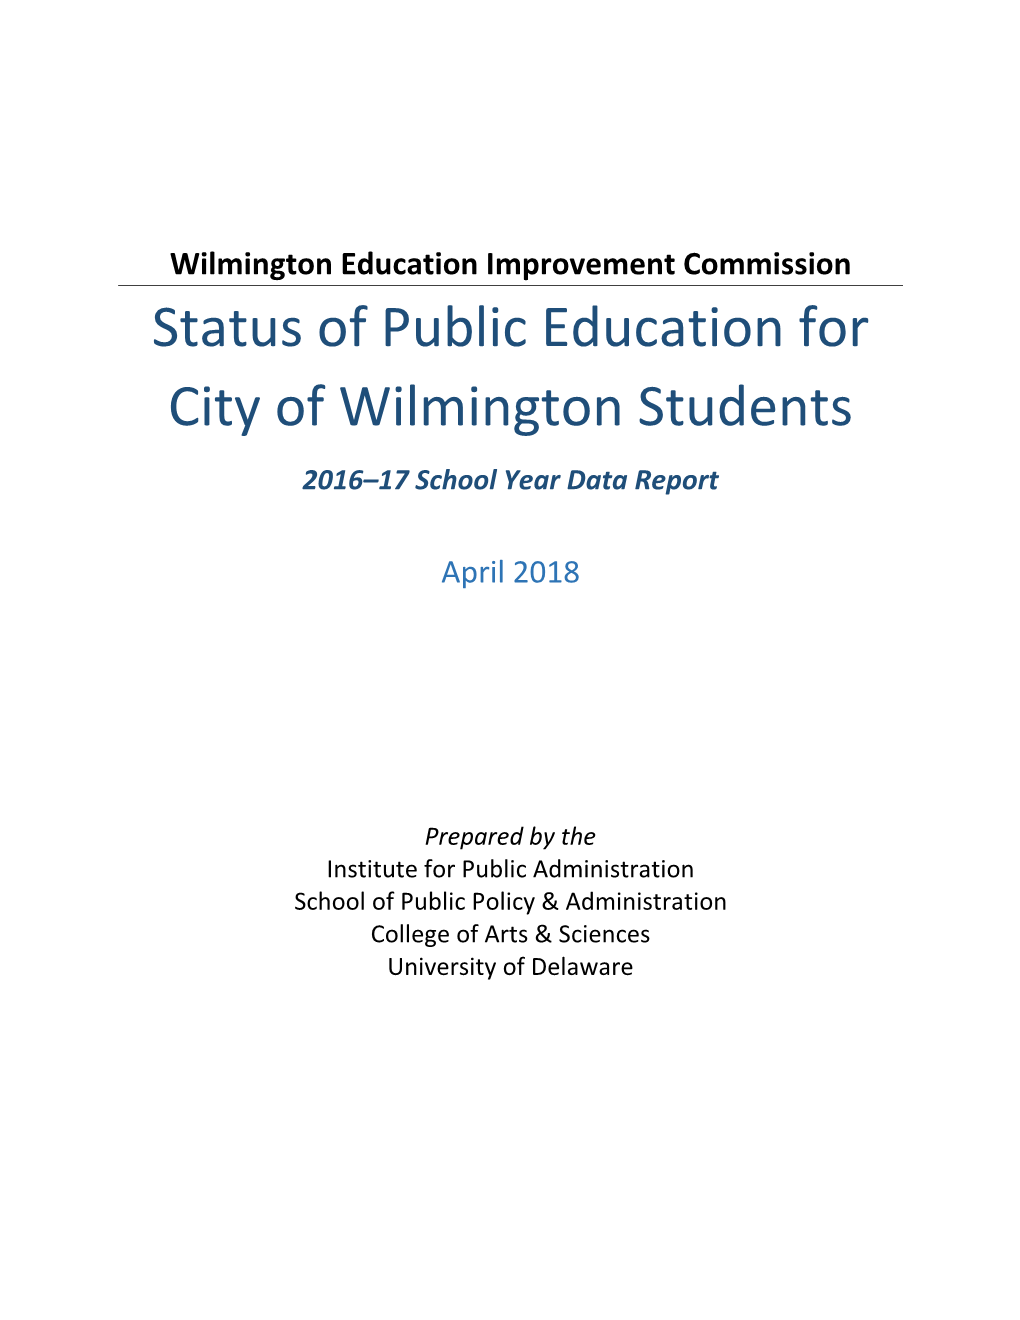 Status of Public Education for City of Wilmington Students 2016–17 School Year Data Report